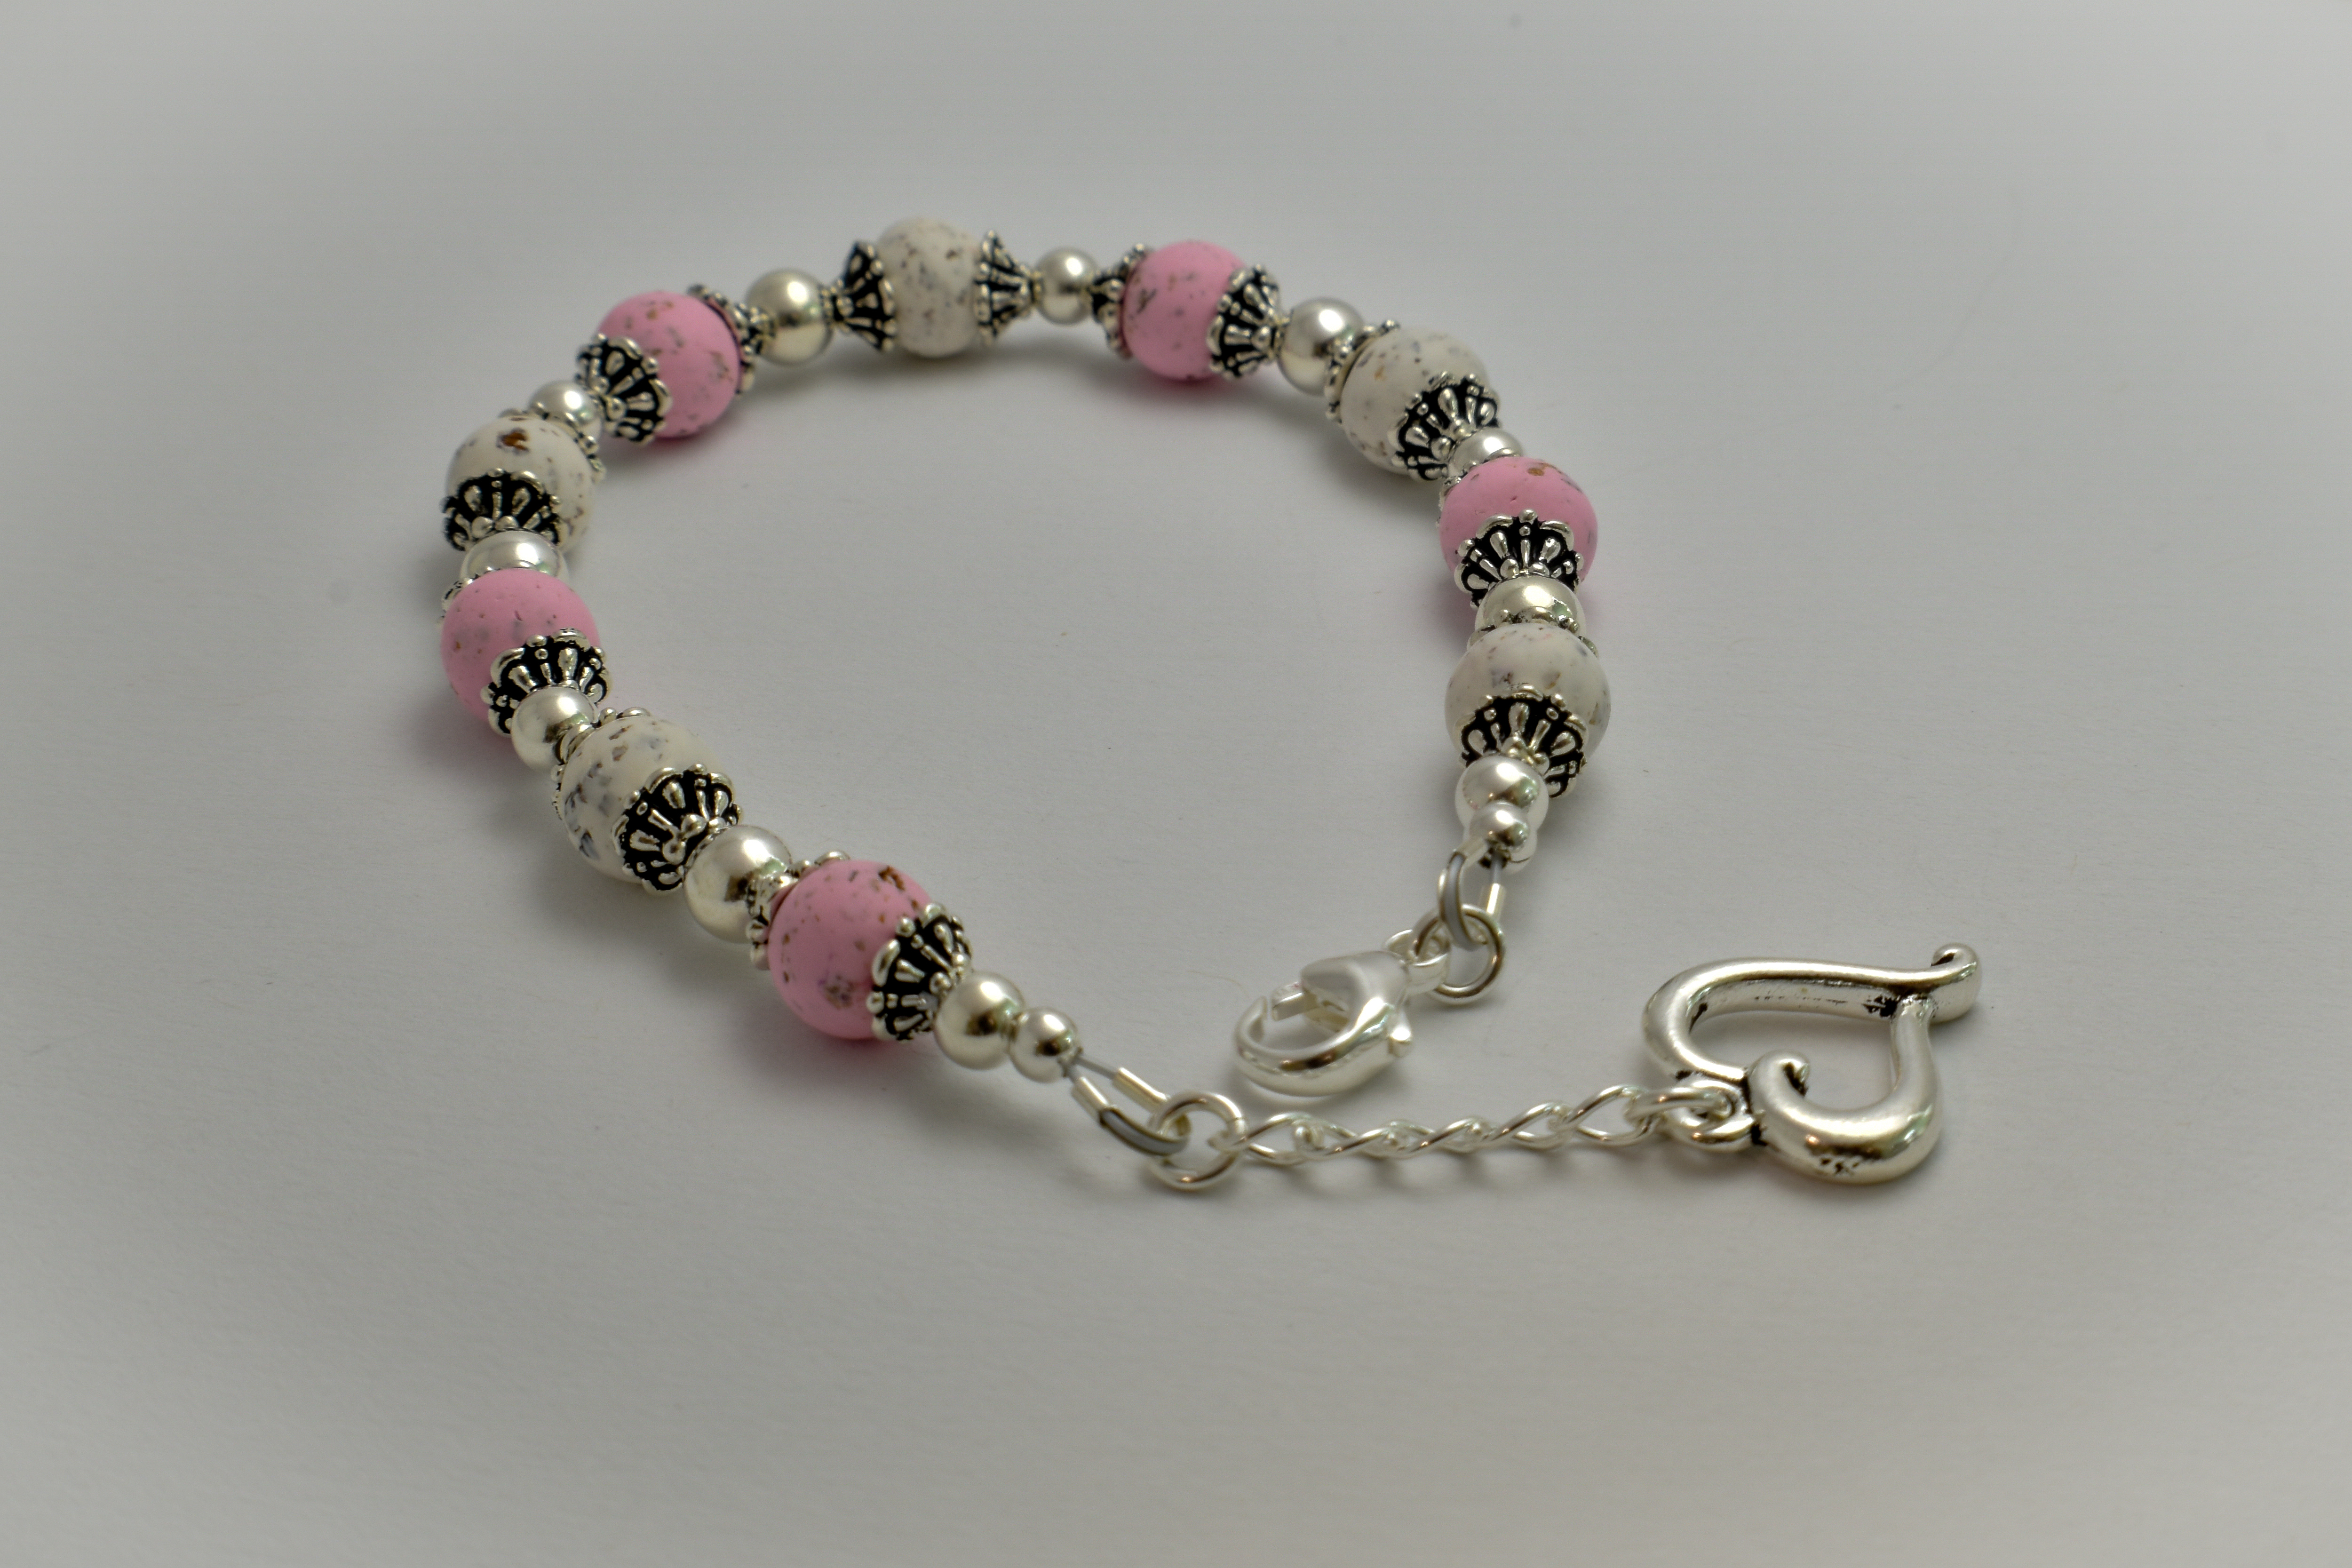 Bracelet with Bead caps - Remember With Roses